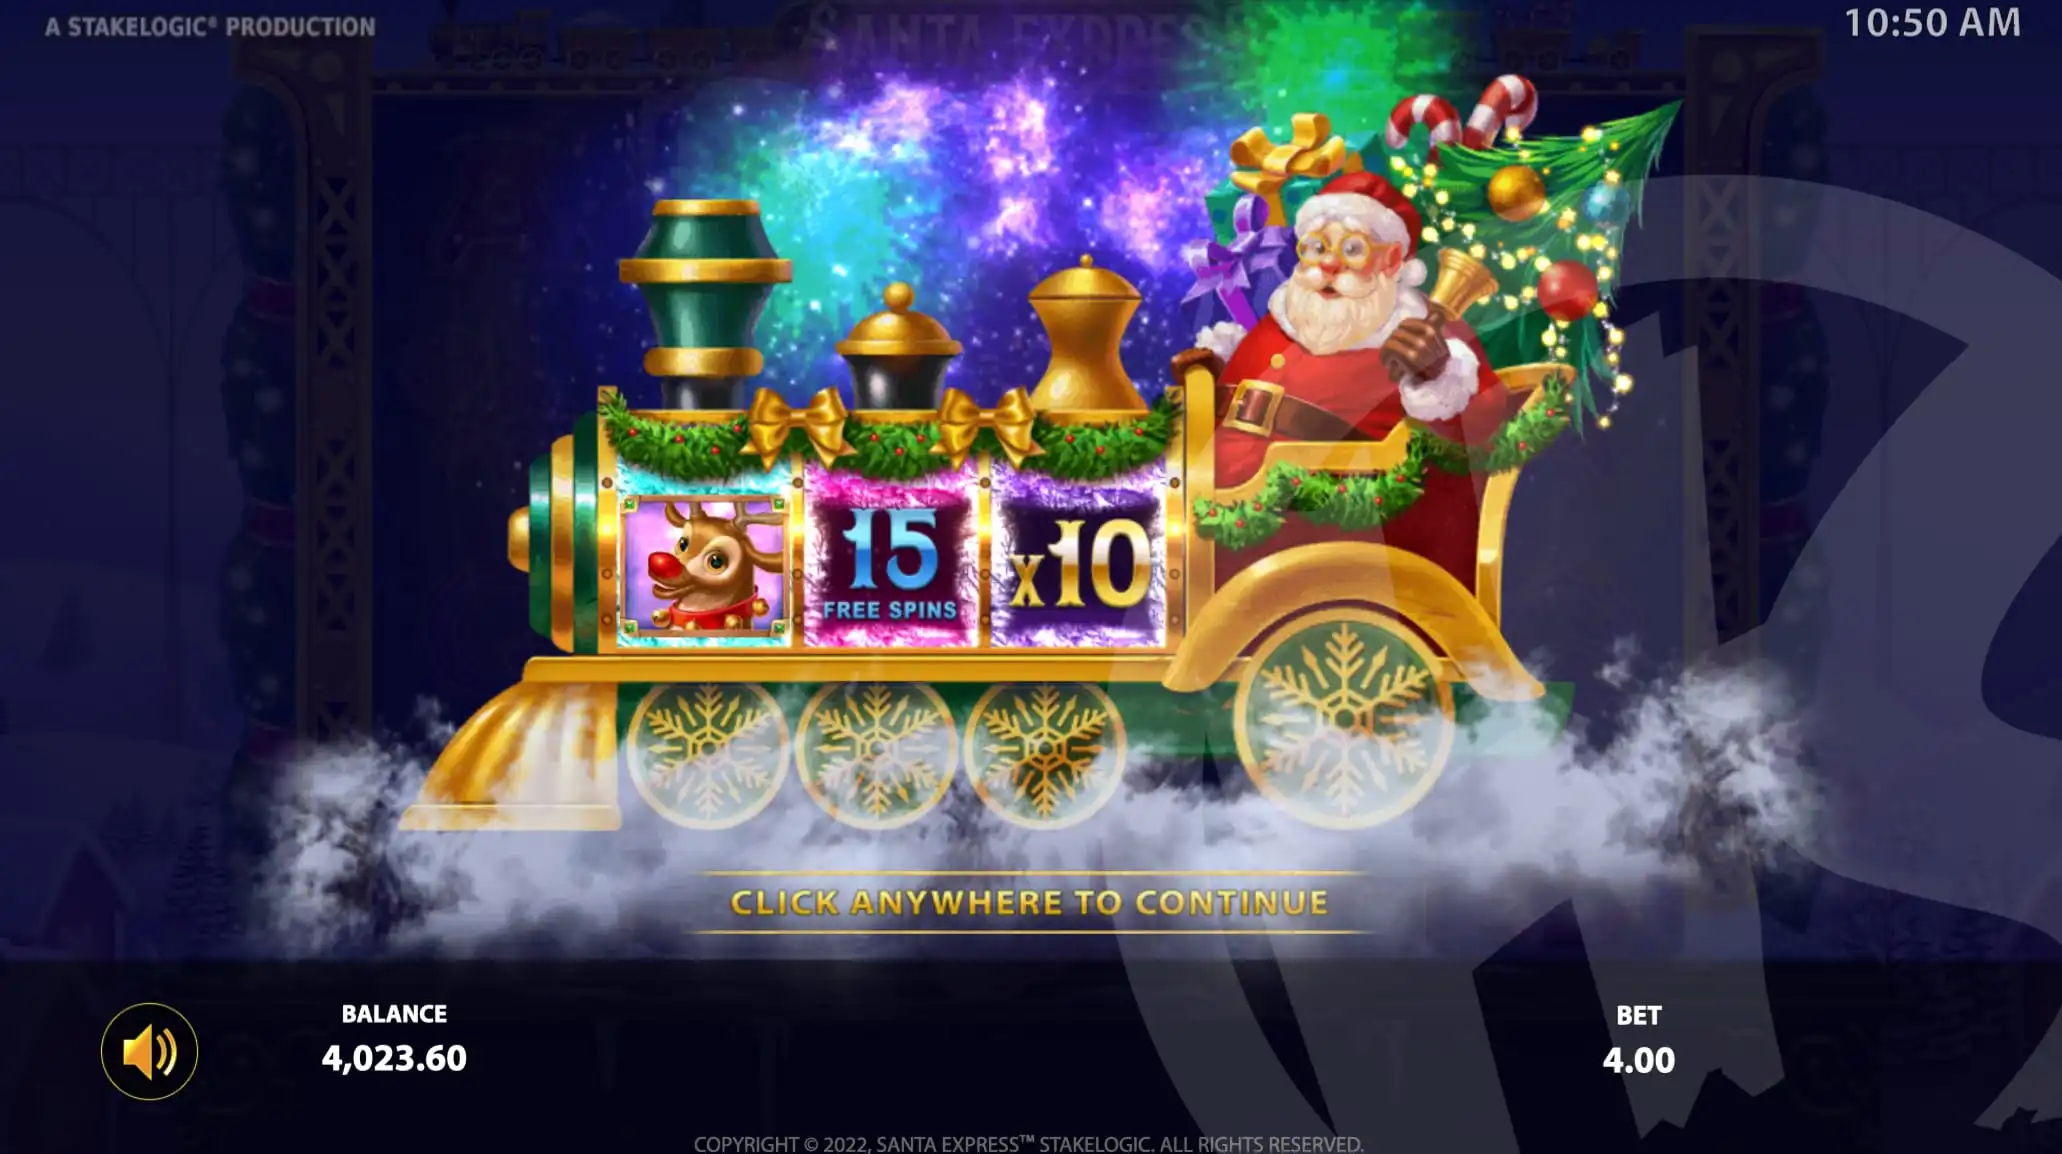 Reveal a Chosen Symbol, a Random Number of Free Spins, and a Win Multiplier Before Free Spins Begin